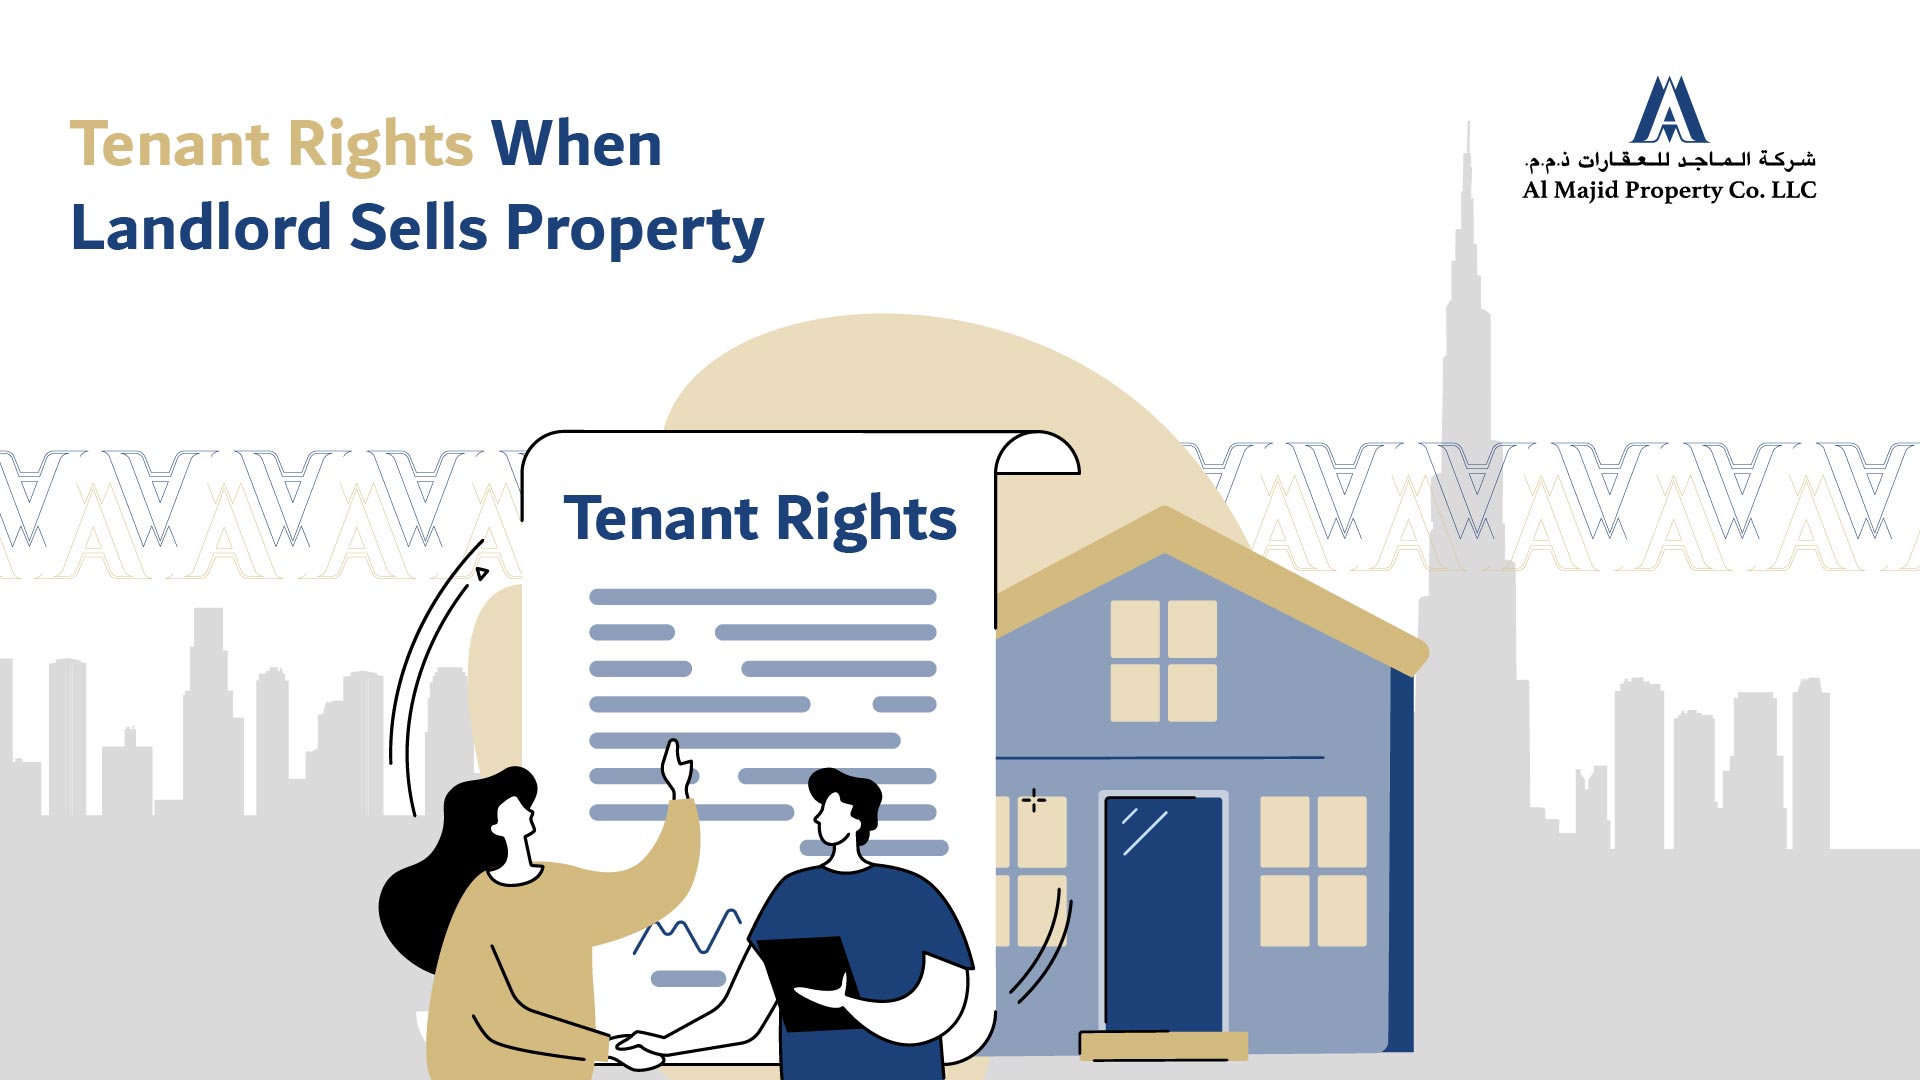 Tenant Rights When Landlord Sells Property